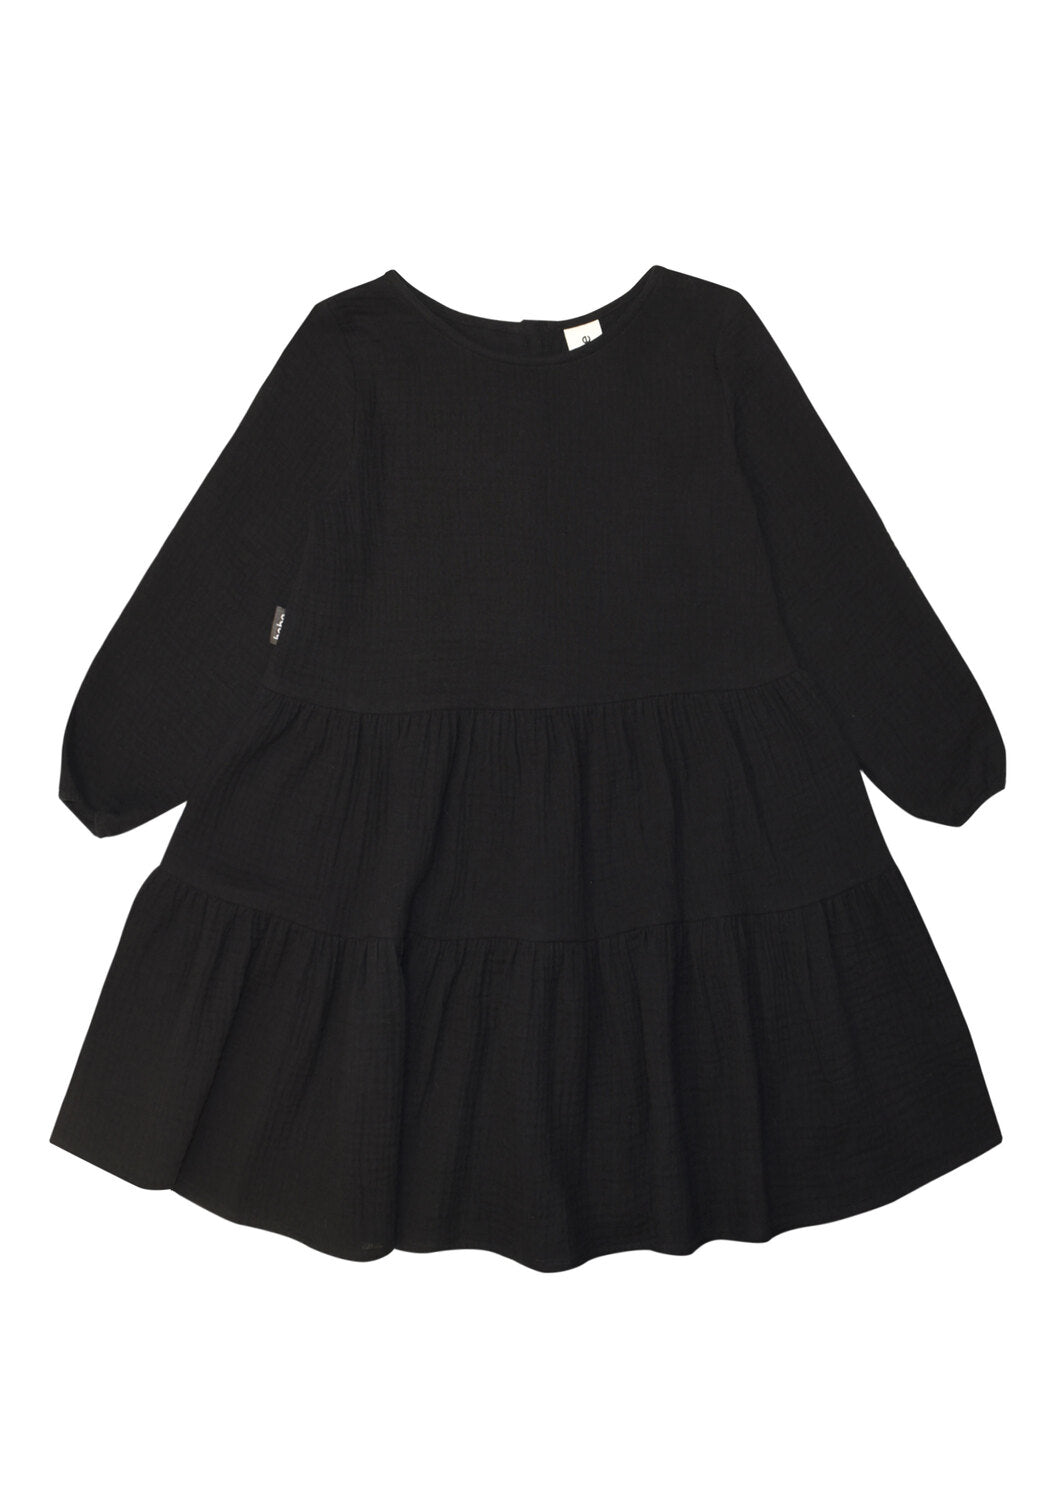 The organic muslin girls long sleeve dress in black color is breathable, comfortable, and easy to wear. Stylish black dress for parties and events with volume and buttons on back.  Milimilu offers kids' clothing, girls' dresses, and girls' fashion online in Hong Kong and Singapore—the best present for girls.